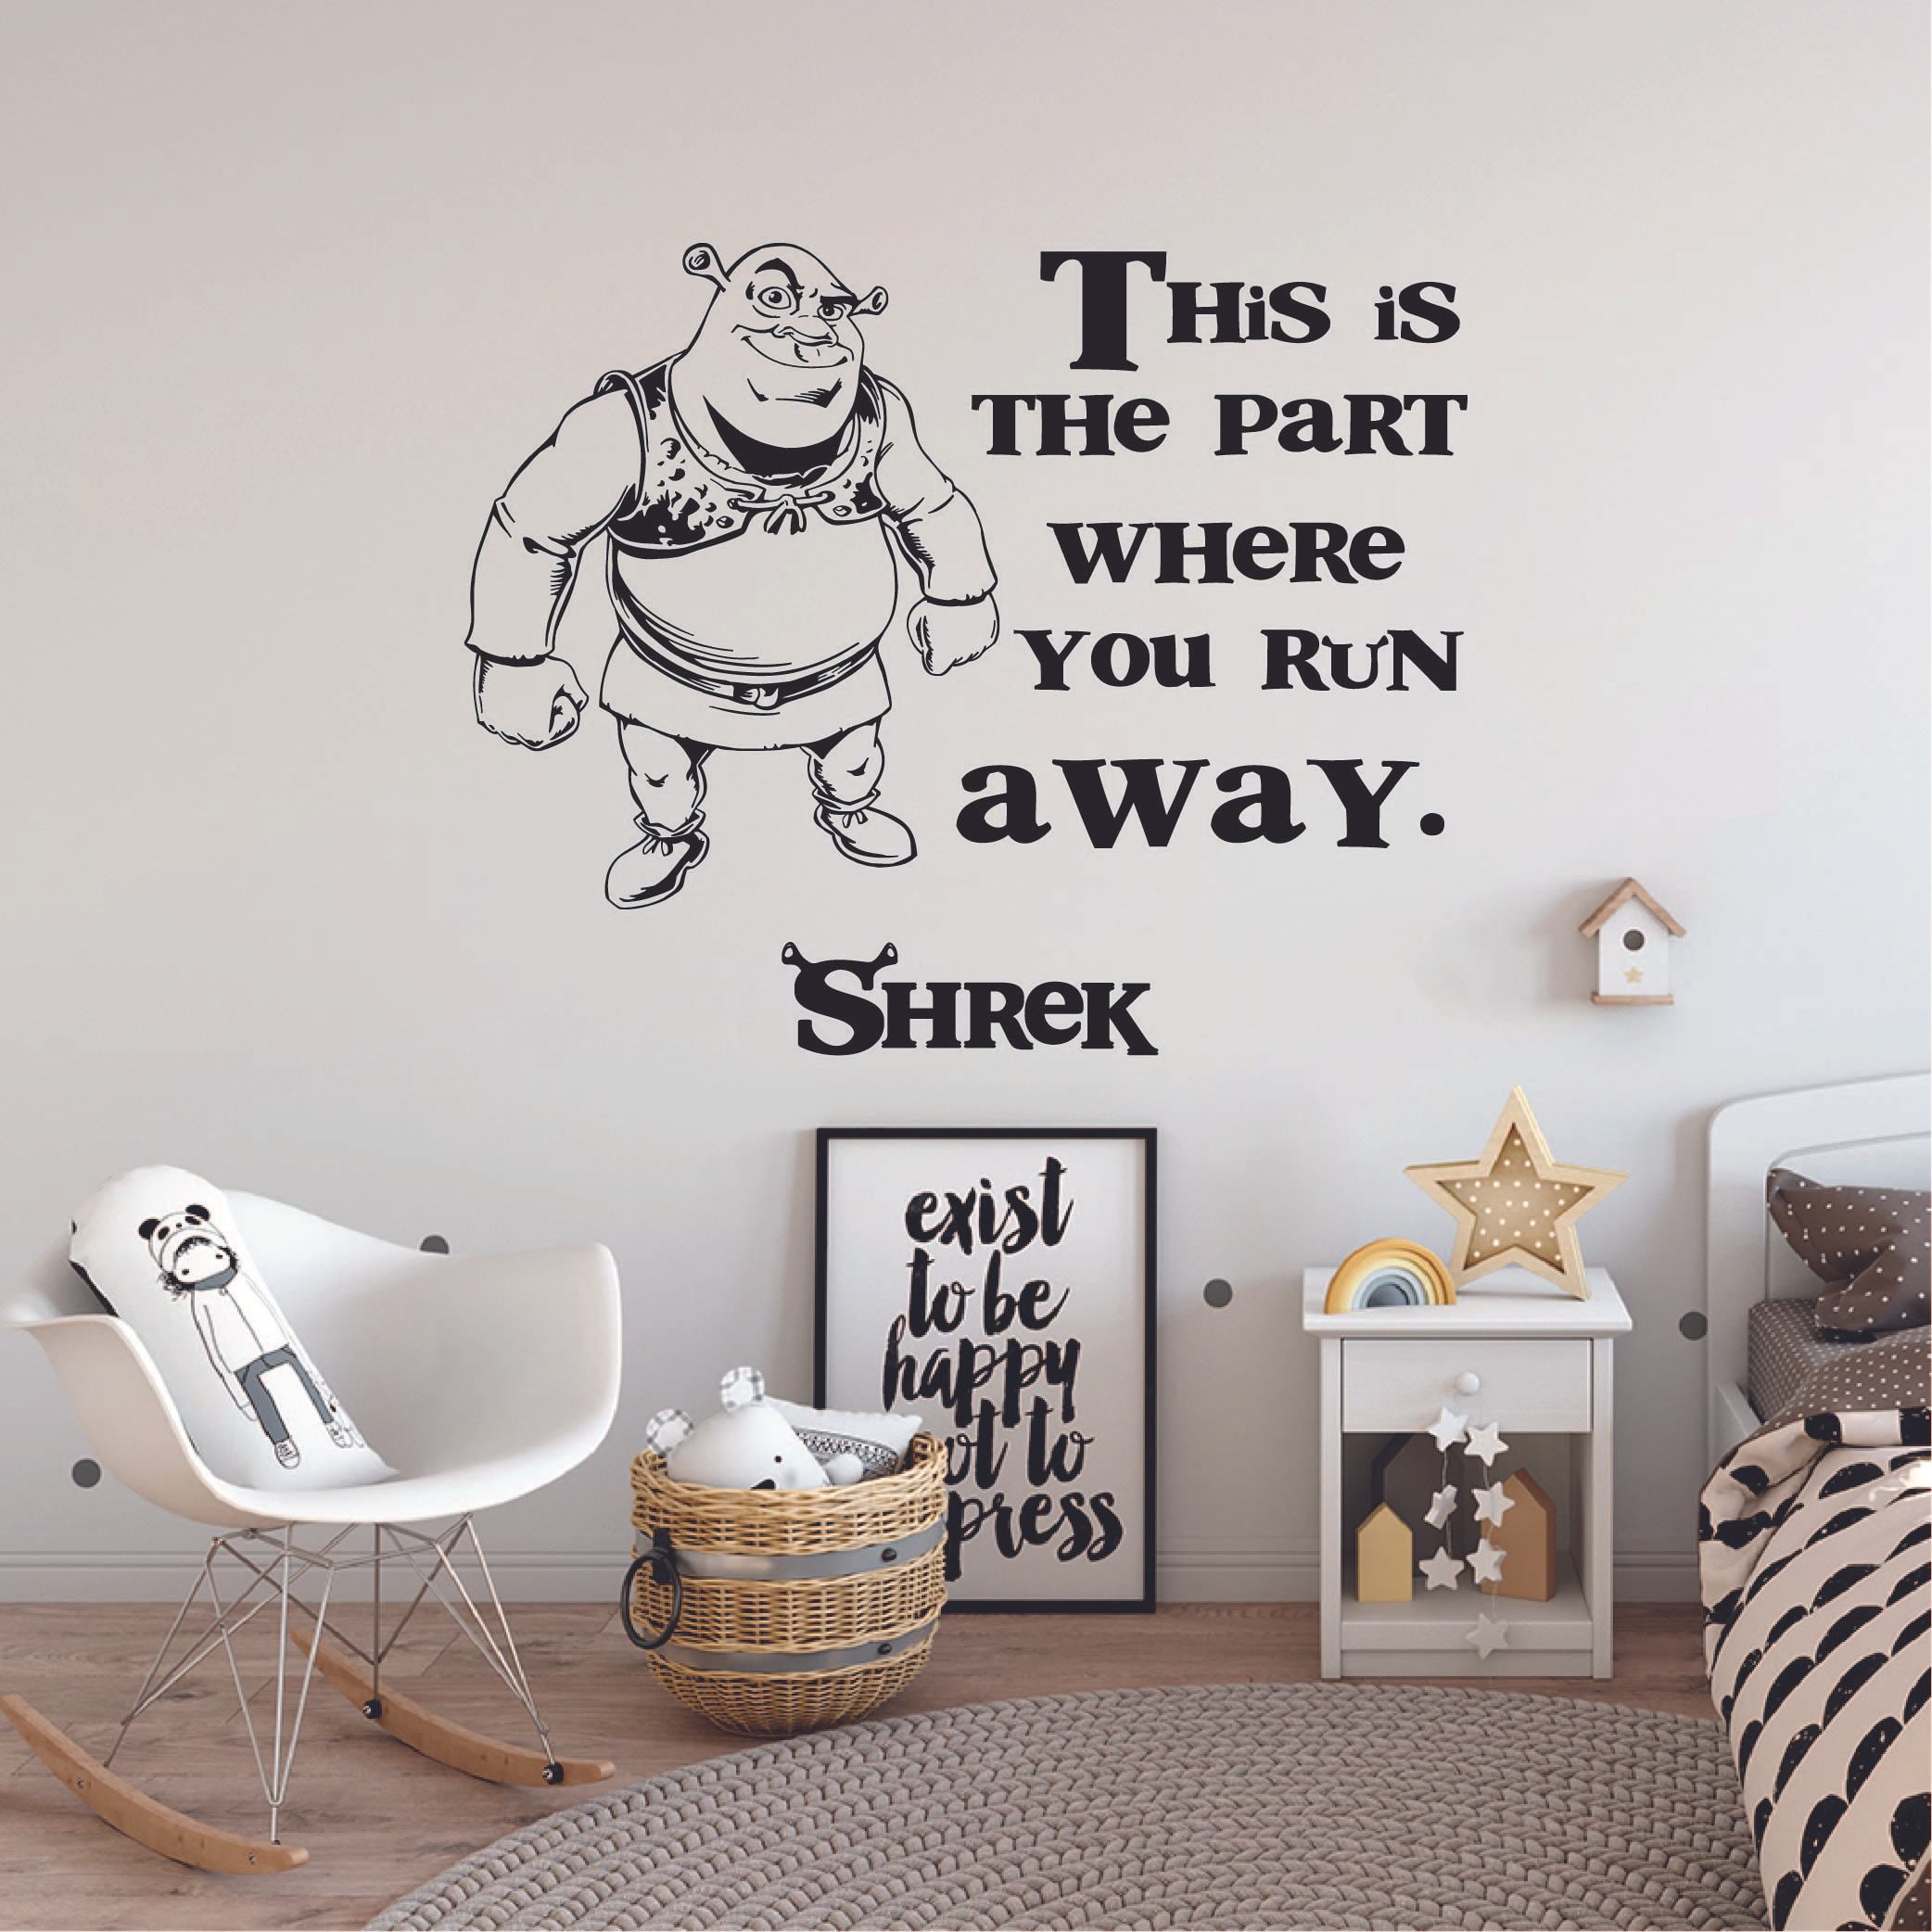 ThIs Is The Part Where You Run Away - DIsney Movie Shrek Quotes Quote Vinyl  Wall Art Wall Decal Wall Sticker Decoration Home Room Kids Childrens Room  Boys Girls Nursery Kindergarten Size (